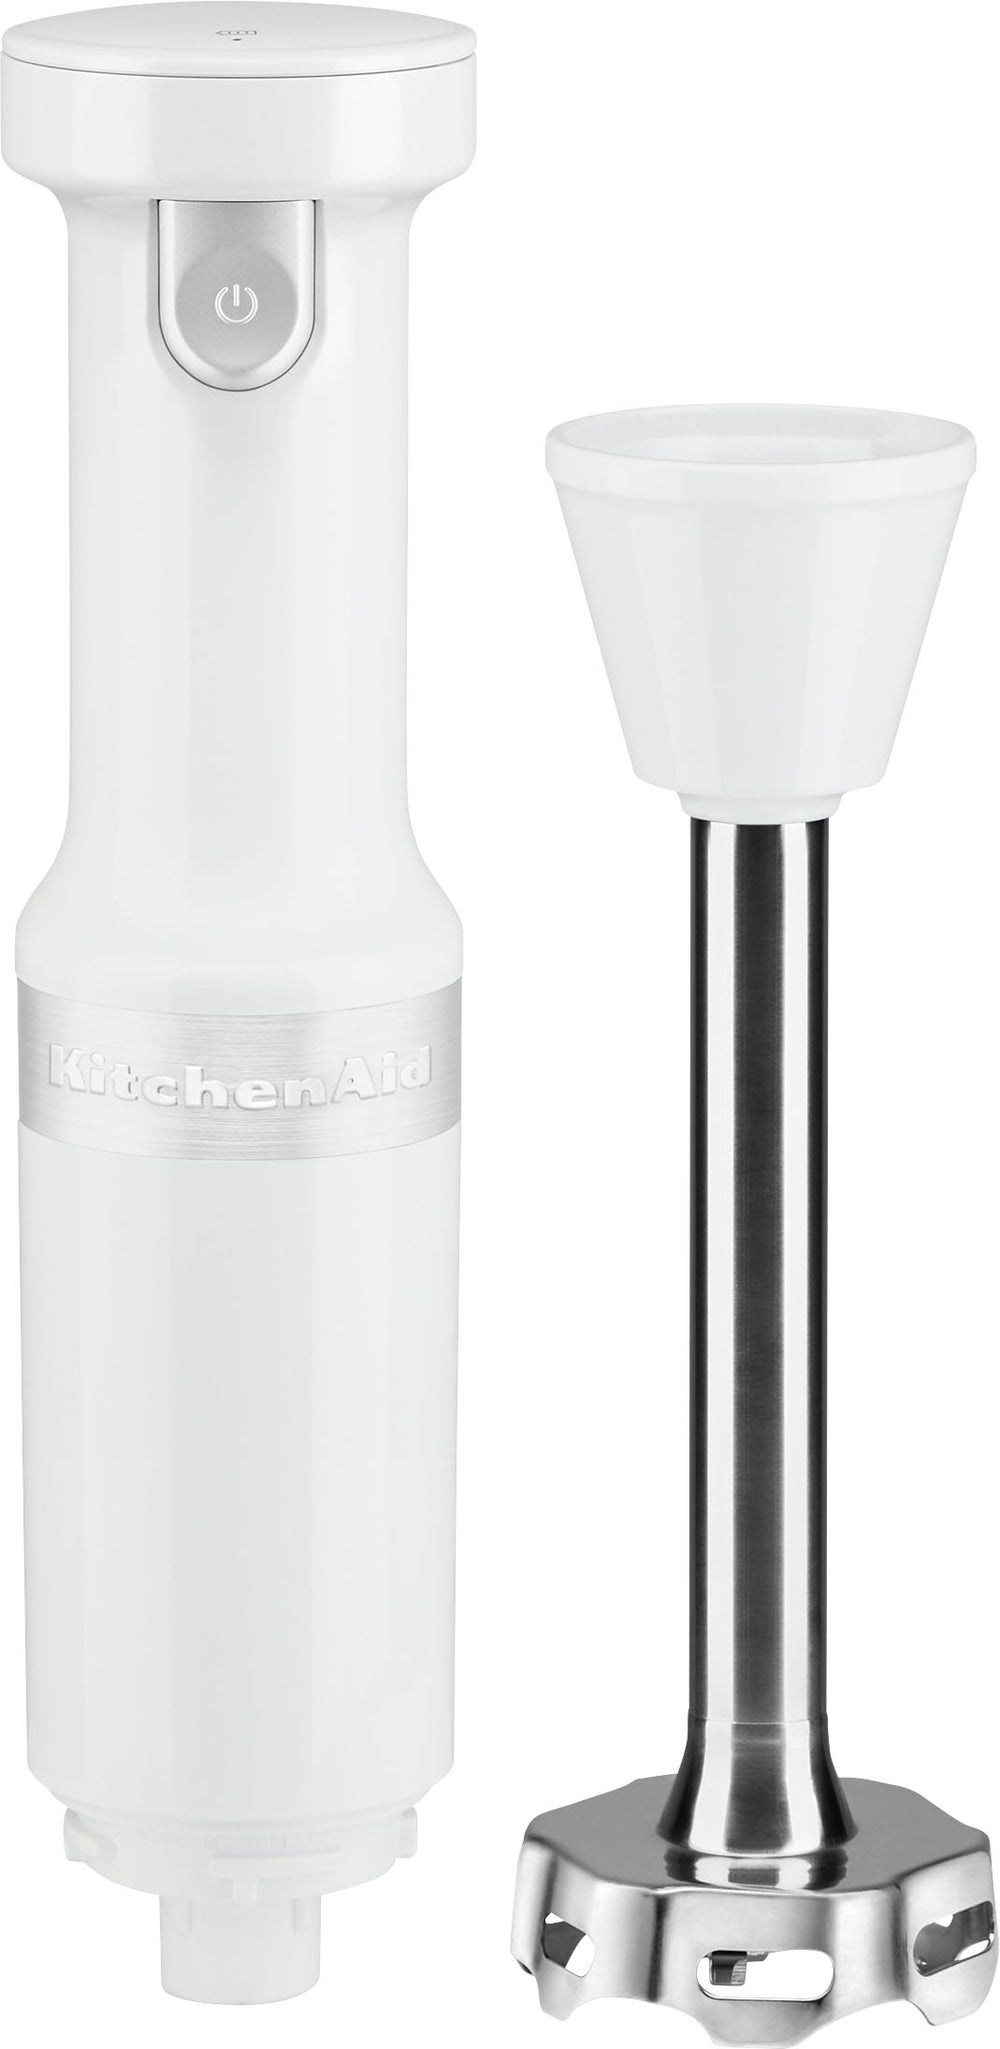 KitchenAid Cordless Variable Speed Hand Blender with Chopper and Whisk attachment - KHBBV83 - White_1